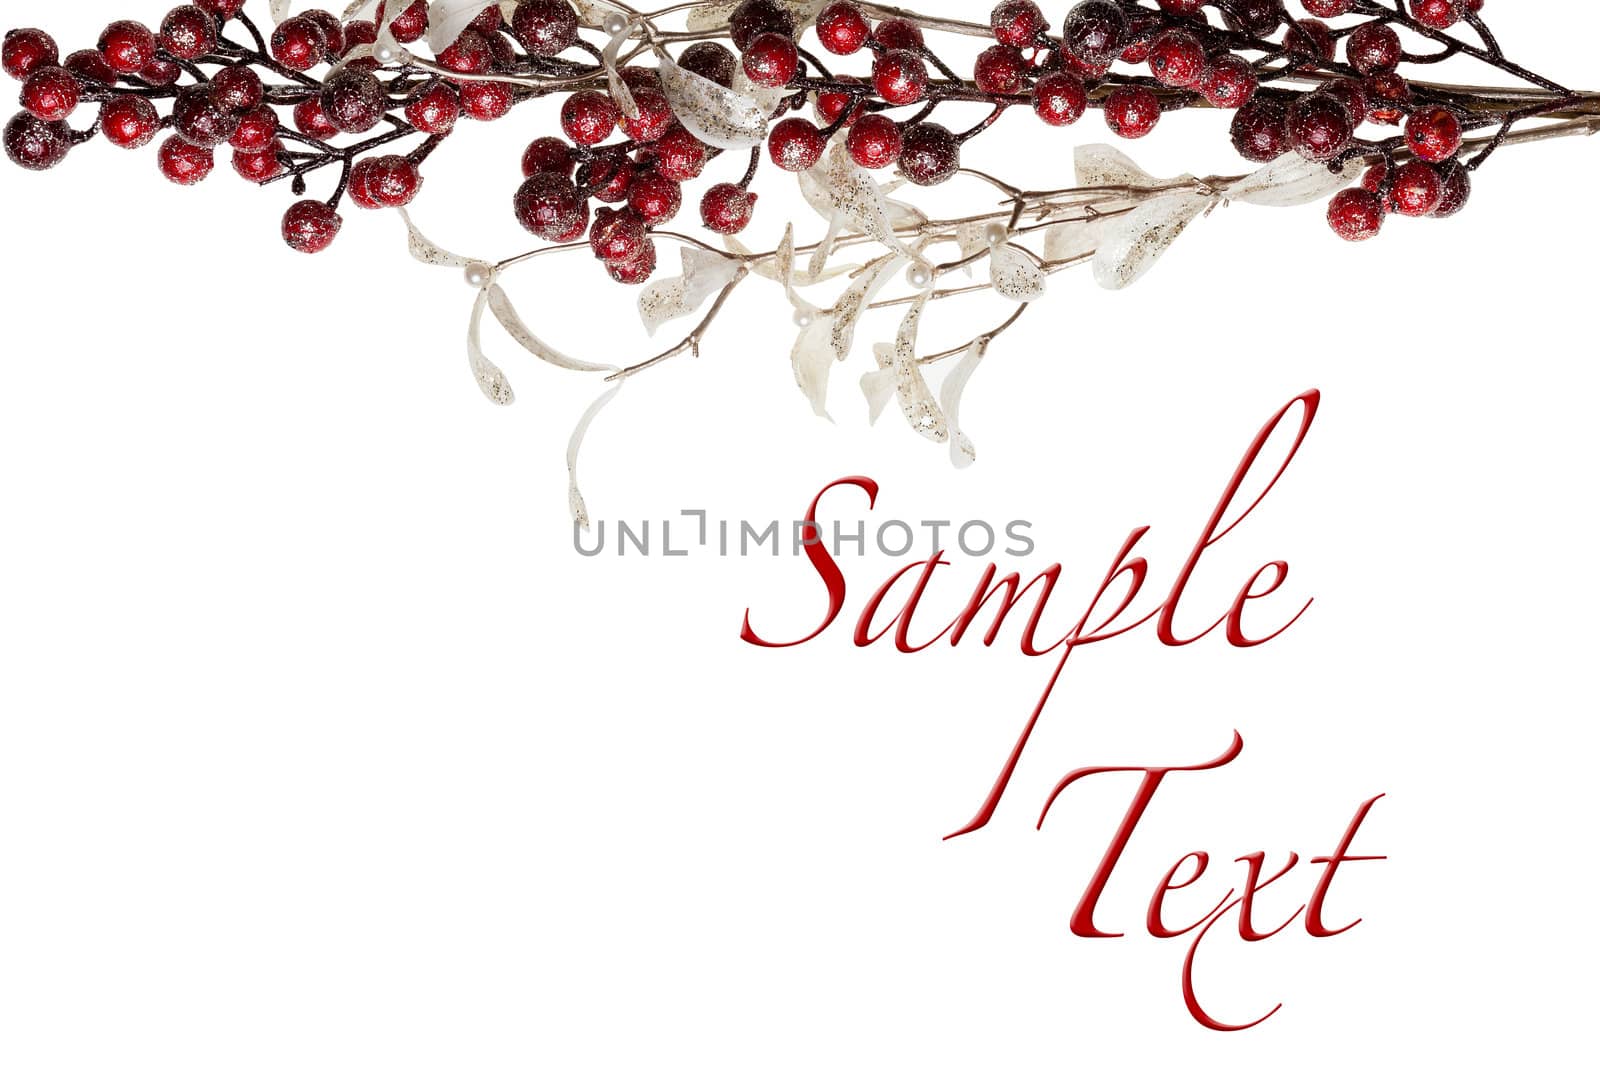 Sparkly Red Berries and Silver Glitter Pearl Leaves Border with Copy Space